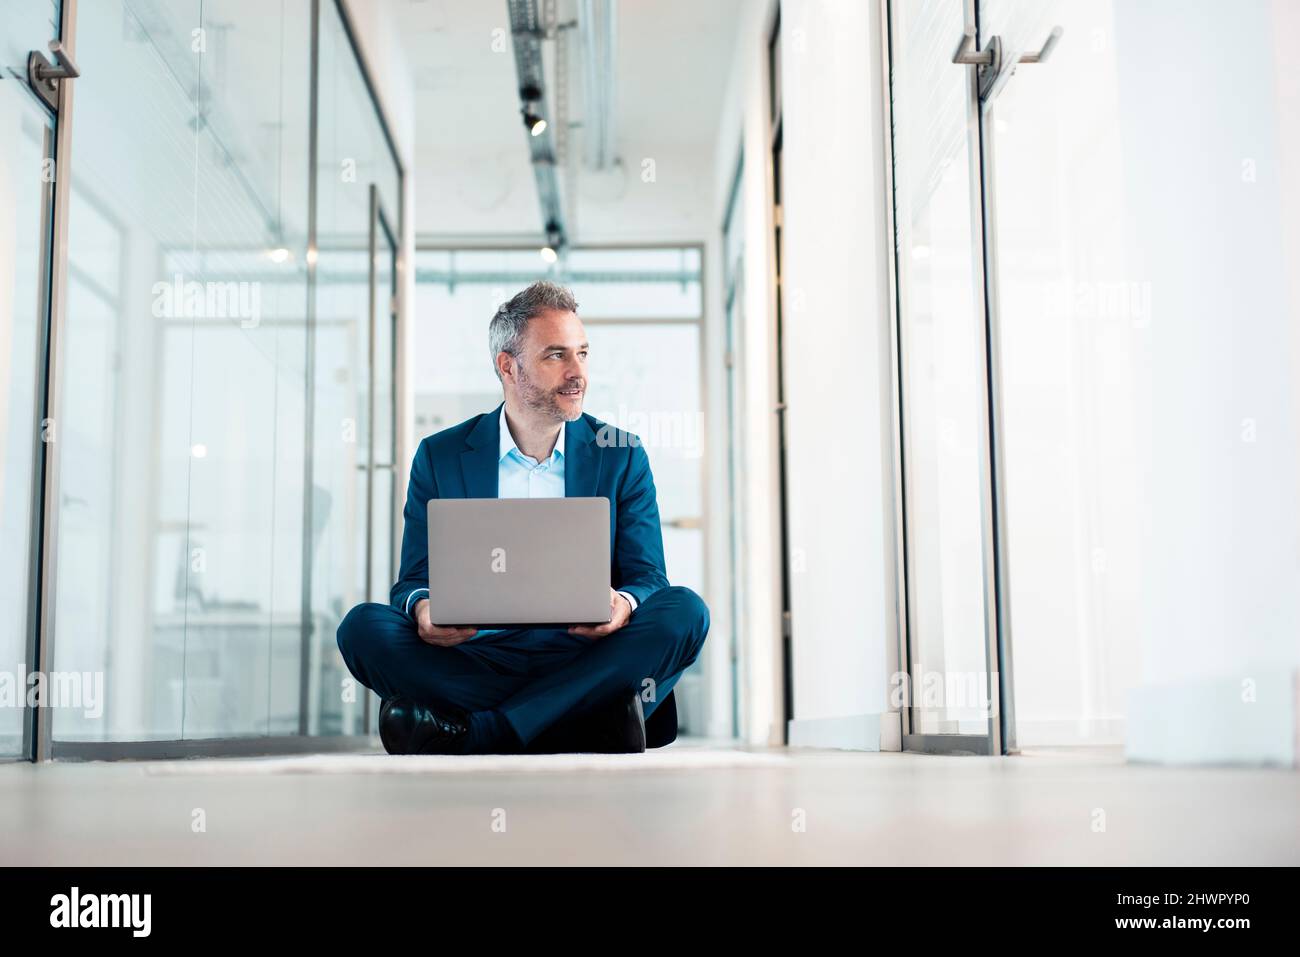 Thoughtful businessman sitting cross-legged with laptop in office corridor Stock Photo